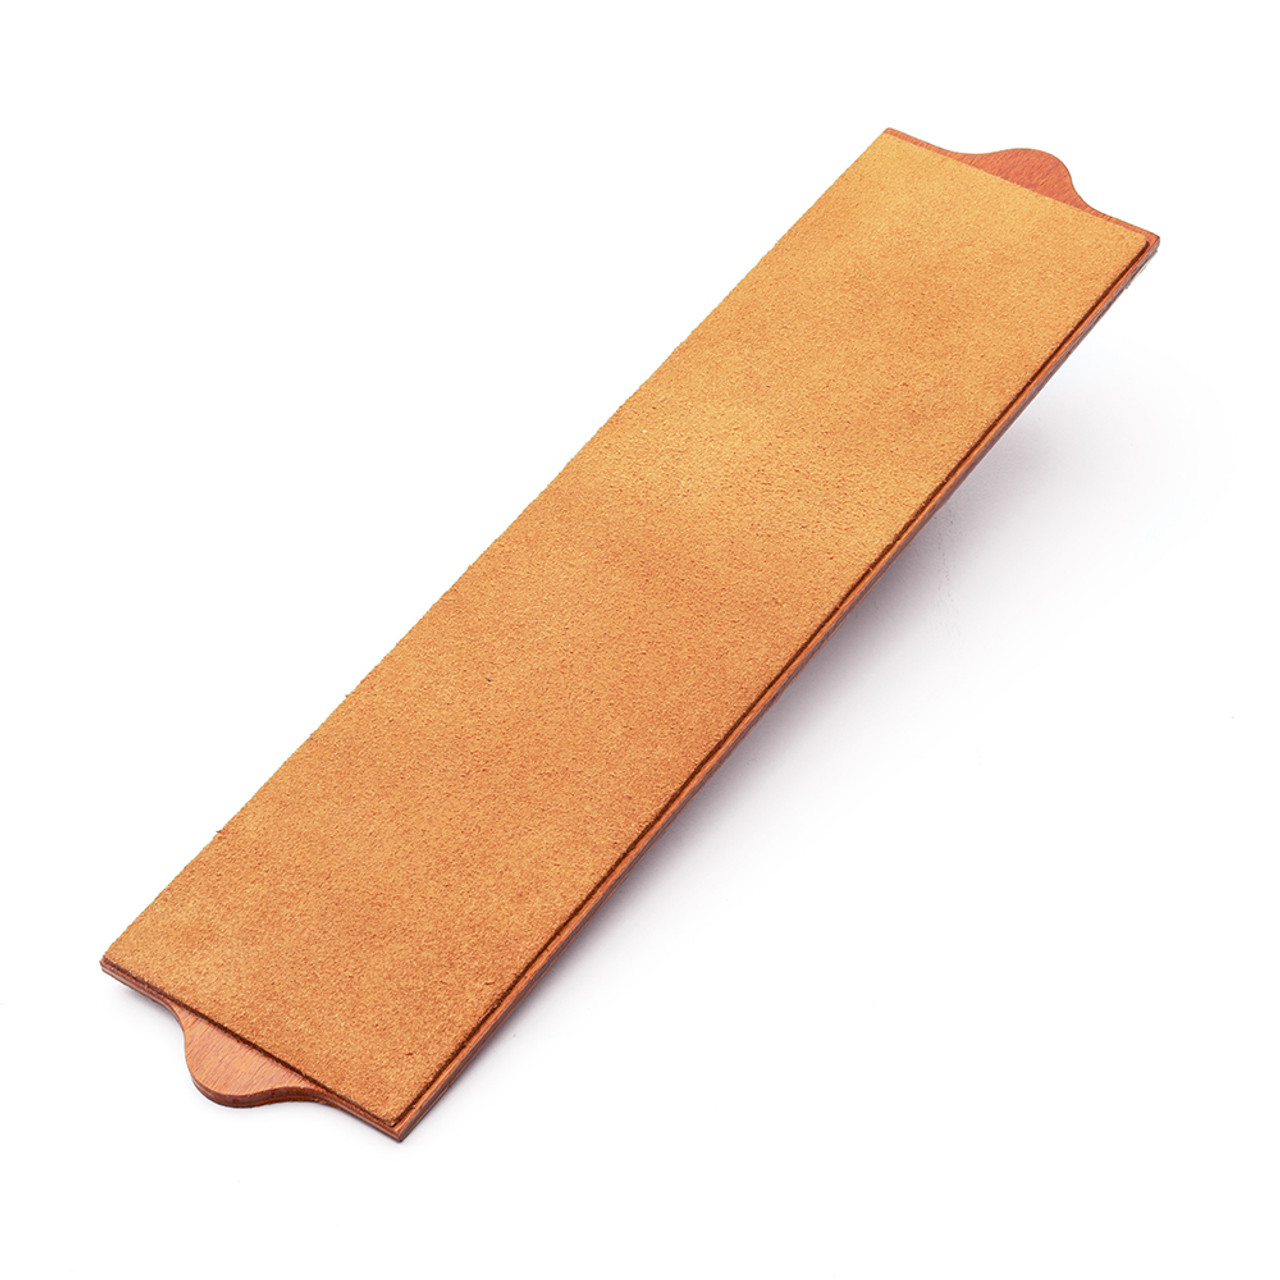 ANGERSTONE Double Sided Leather Strop Kit(14.3" X 3"